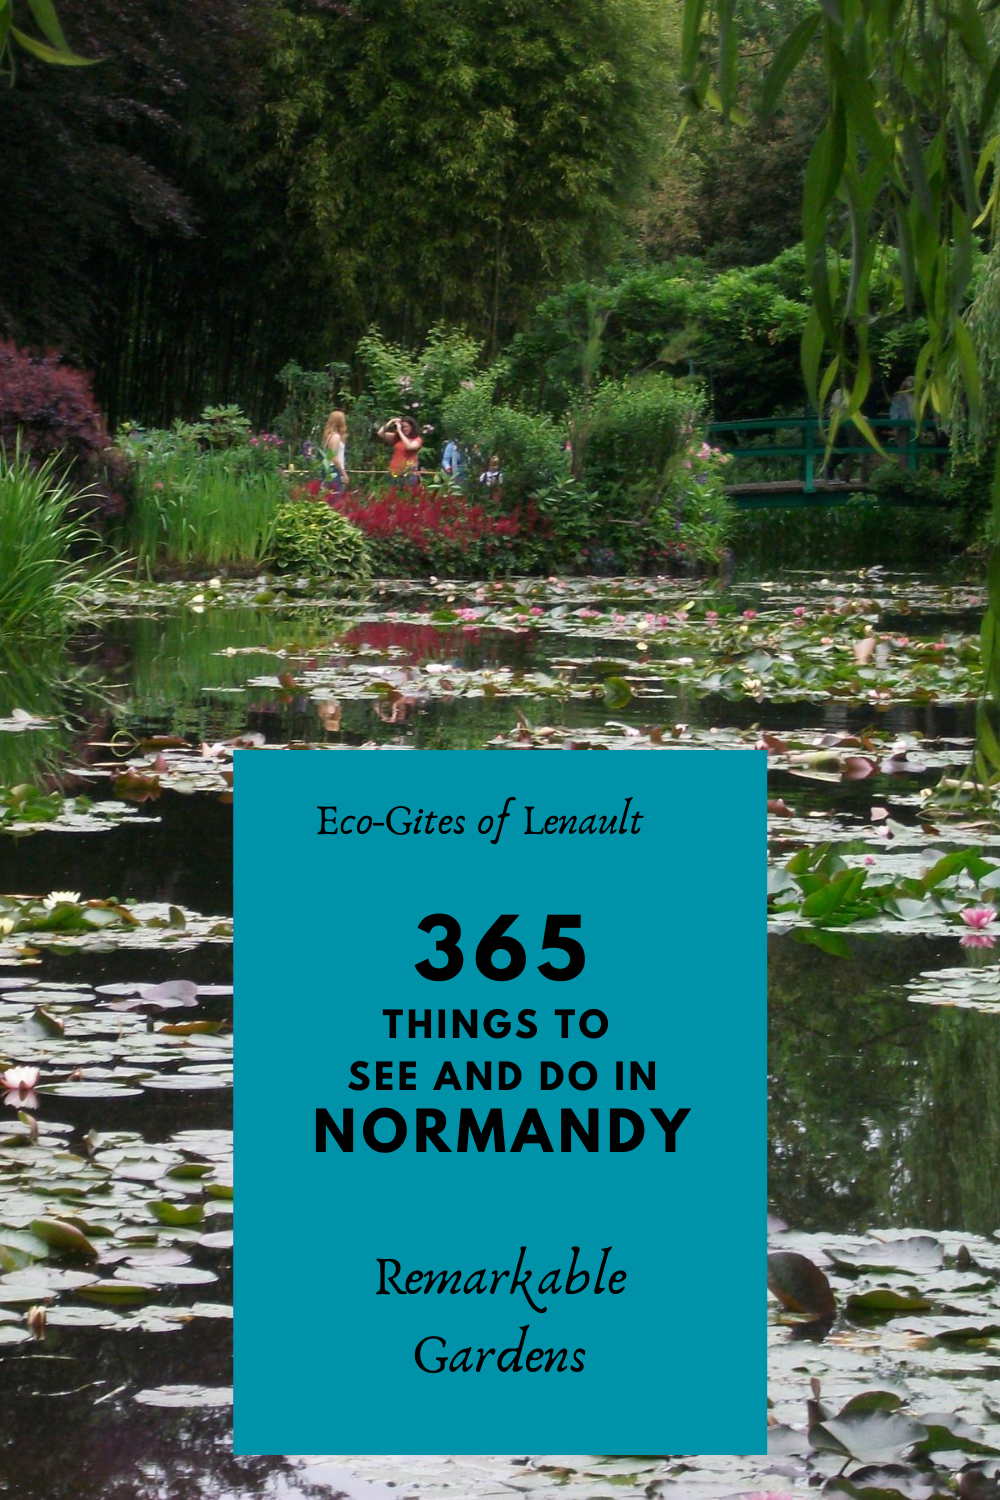 Remarkable gardens of Normandy, France